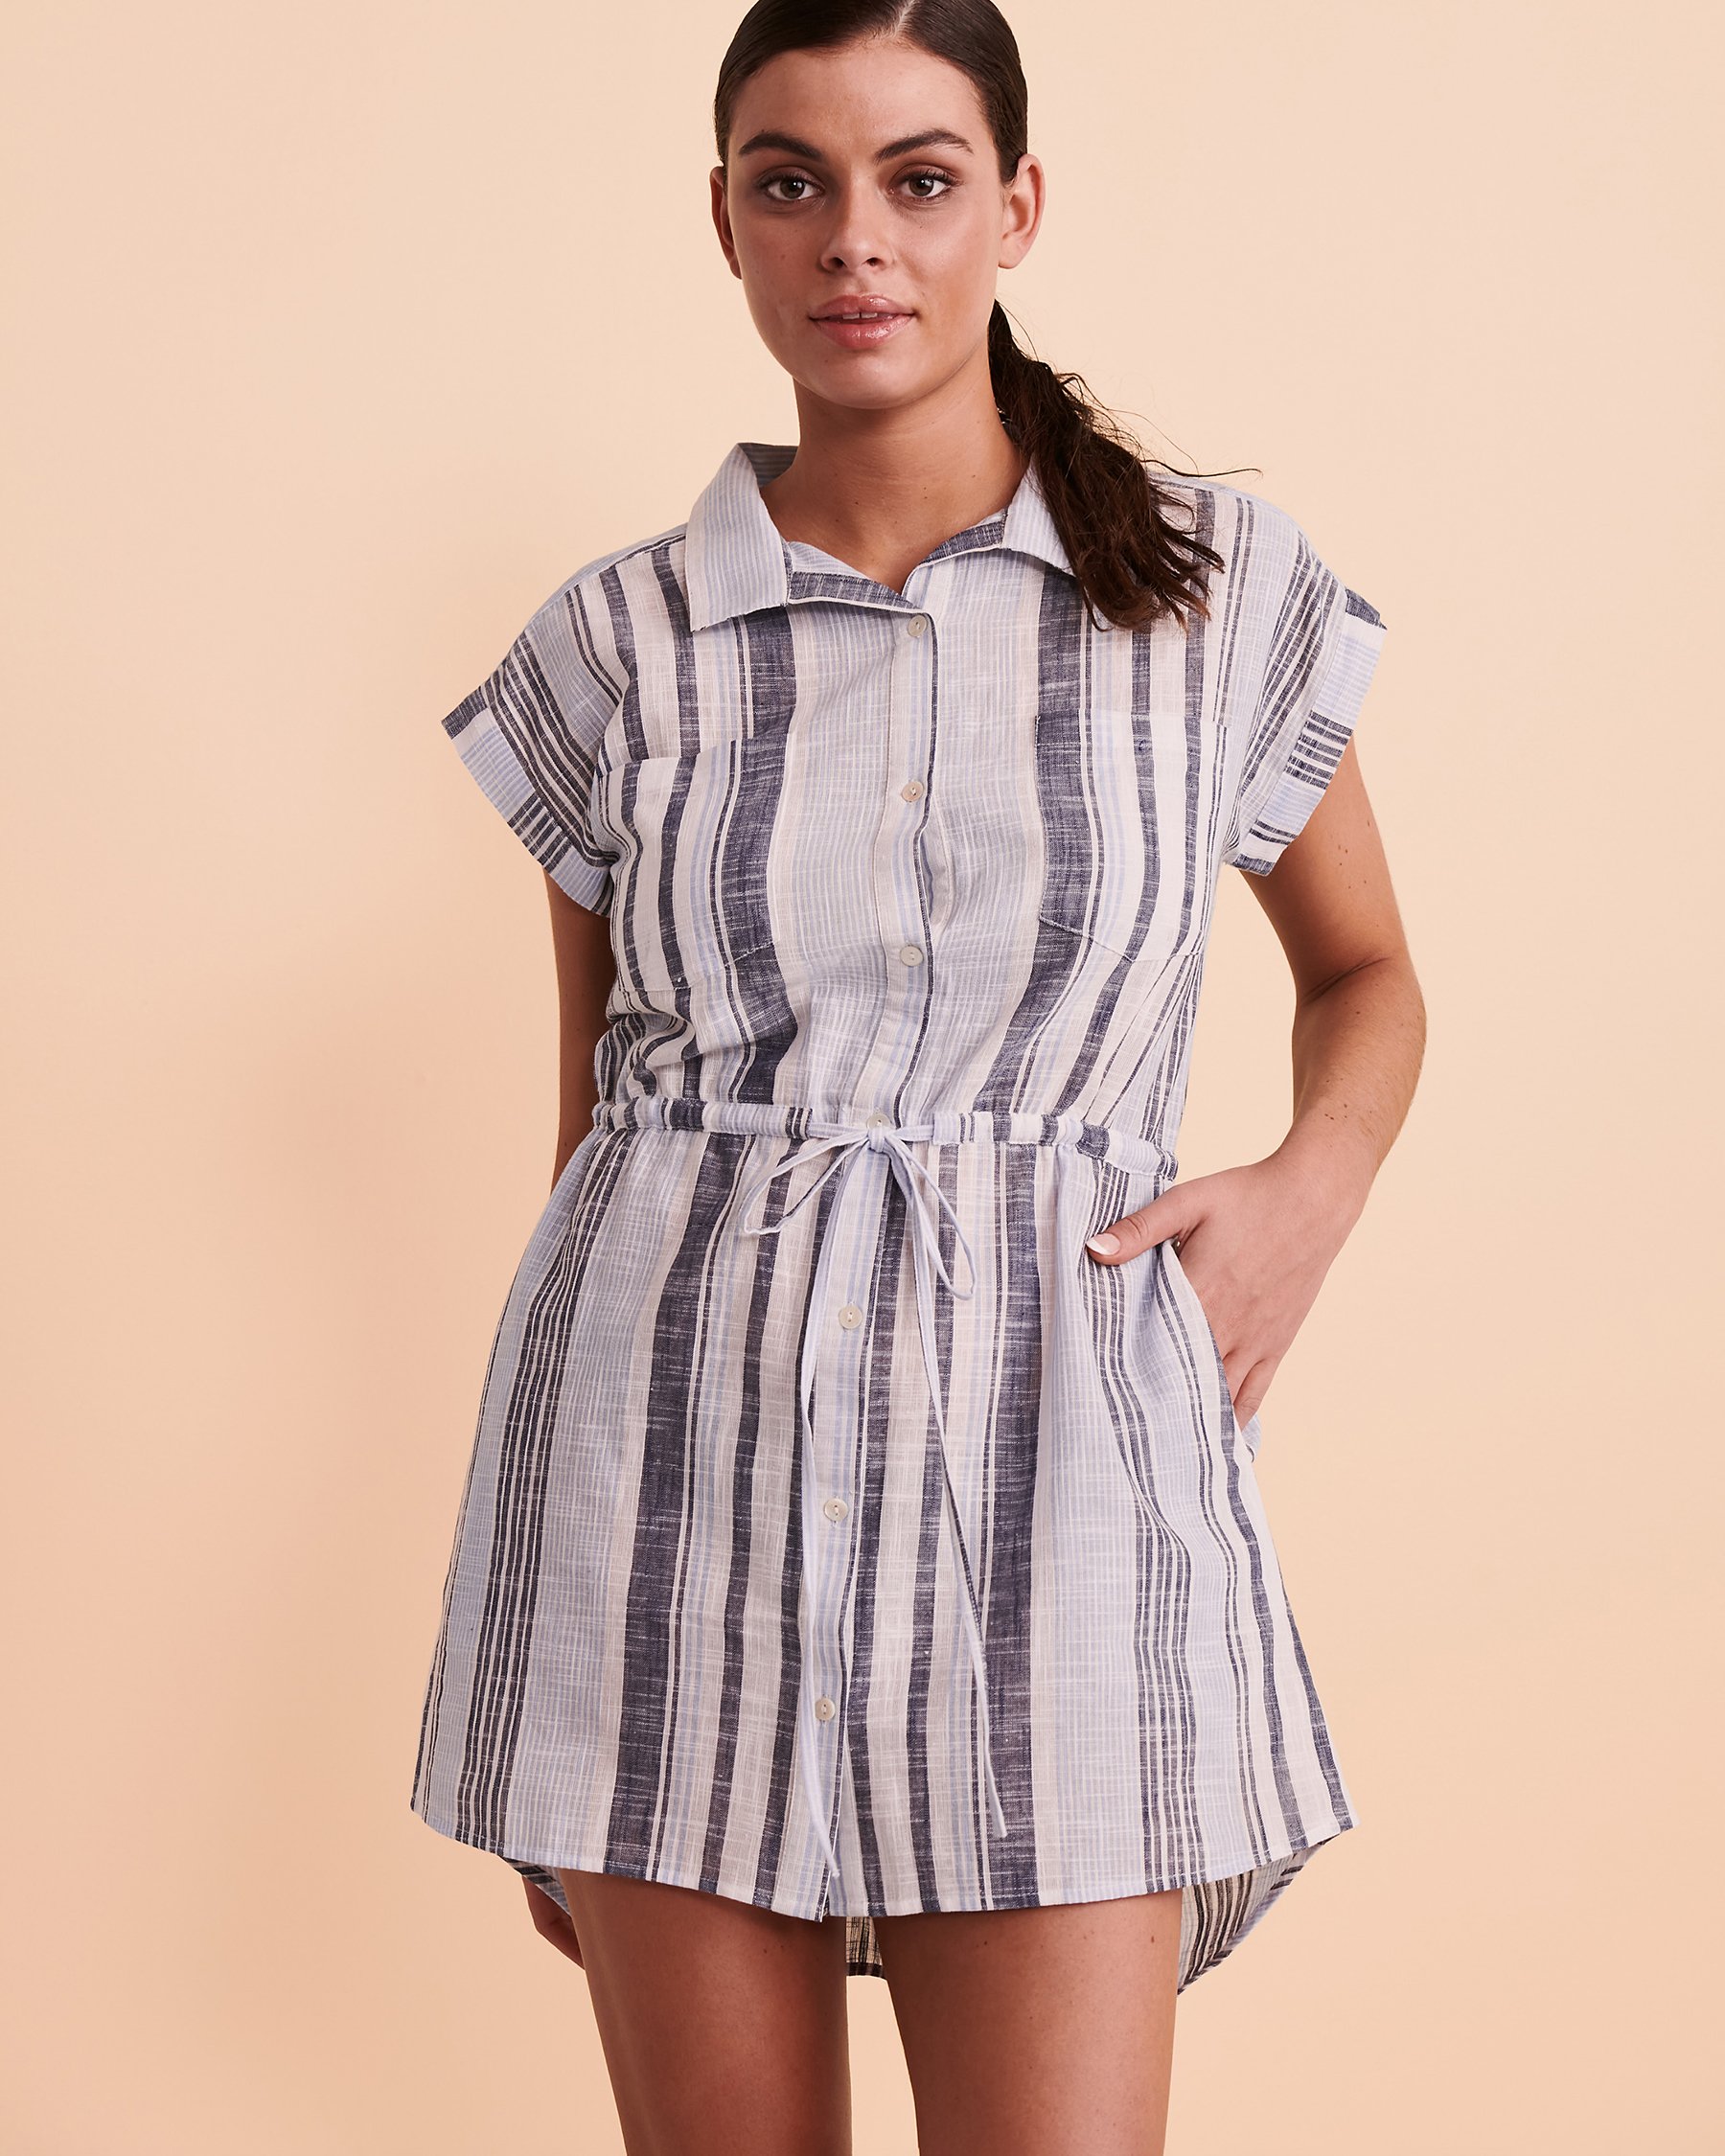 COVER ME Short Sleeve Button-down Dress Multi-stripes 22023250 - View1